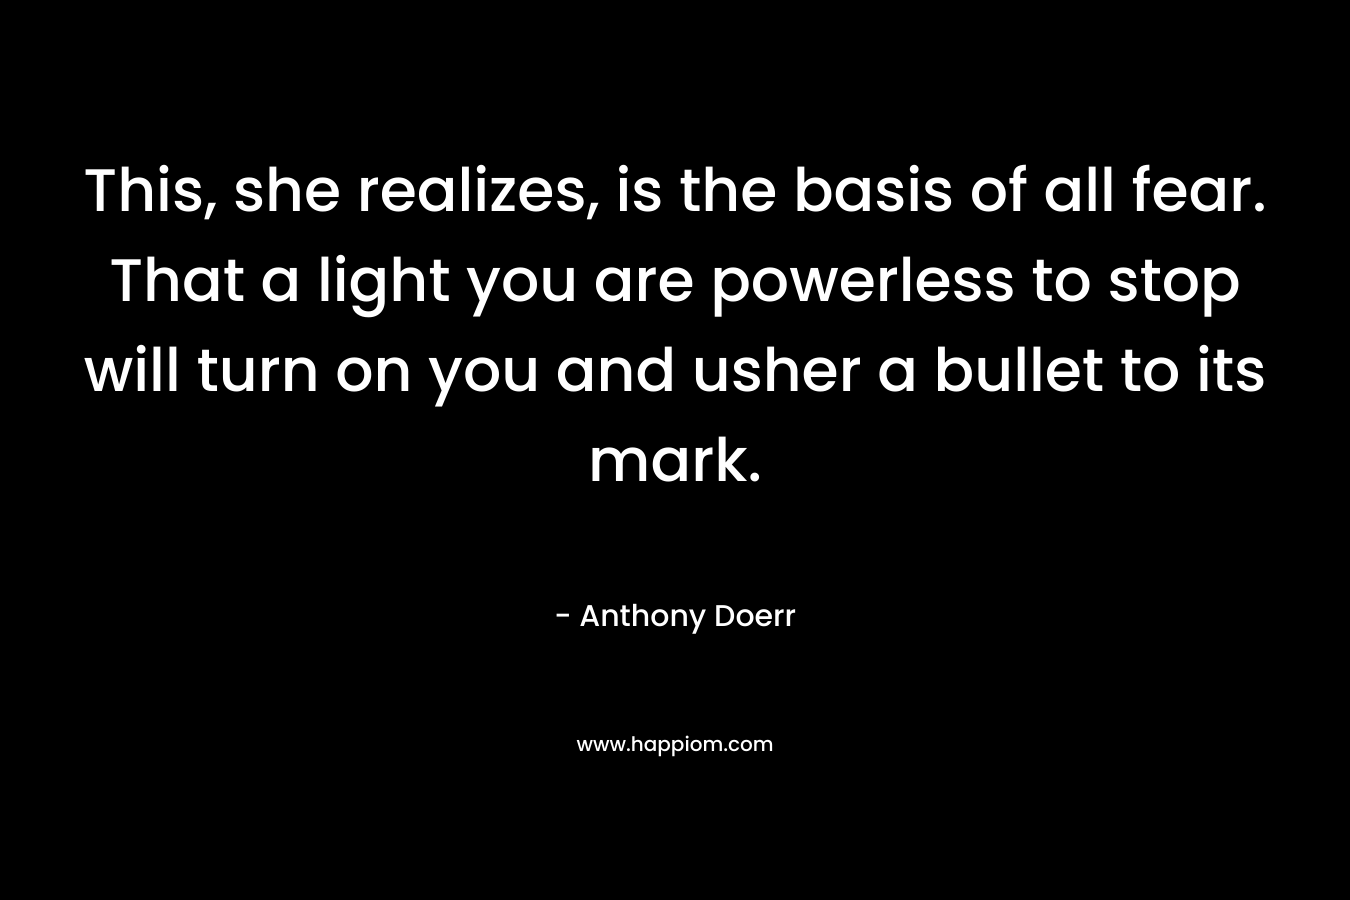 This, she realizes, is the basis of all fear. That a light you are powerless to stop will turn on you and usher a bullet to its mark. – Anthony Doerr